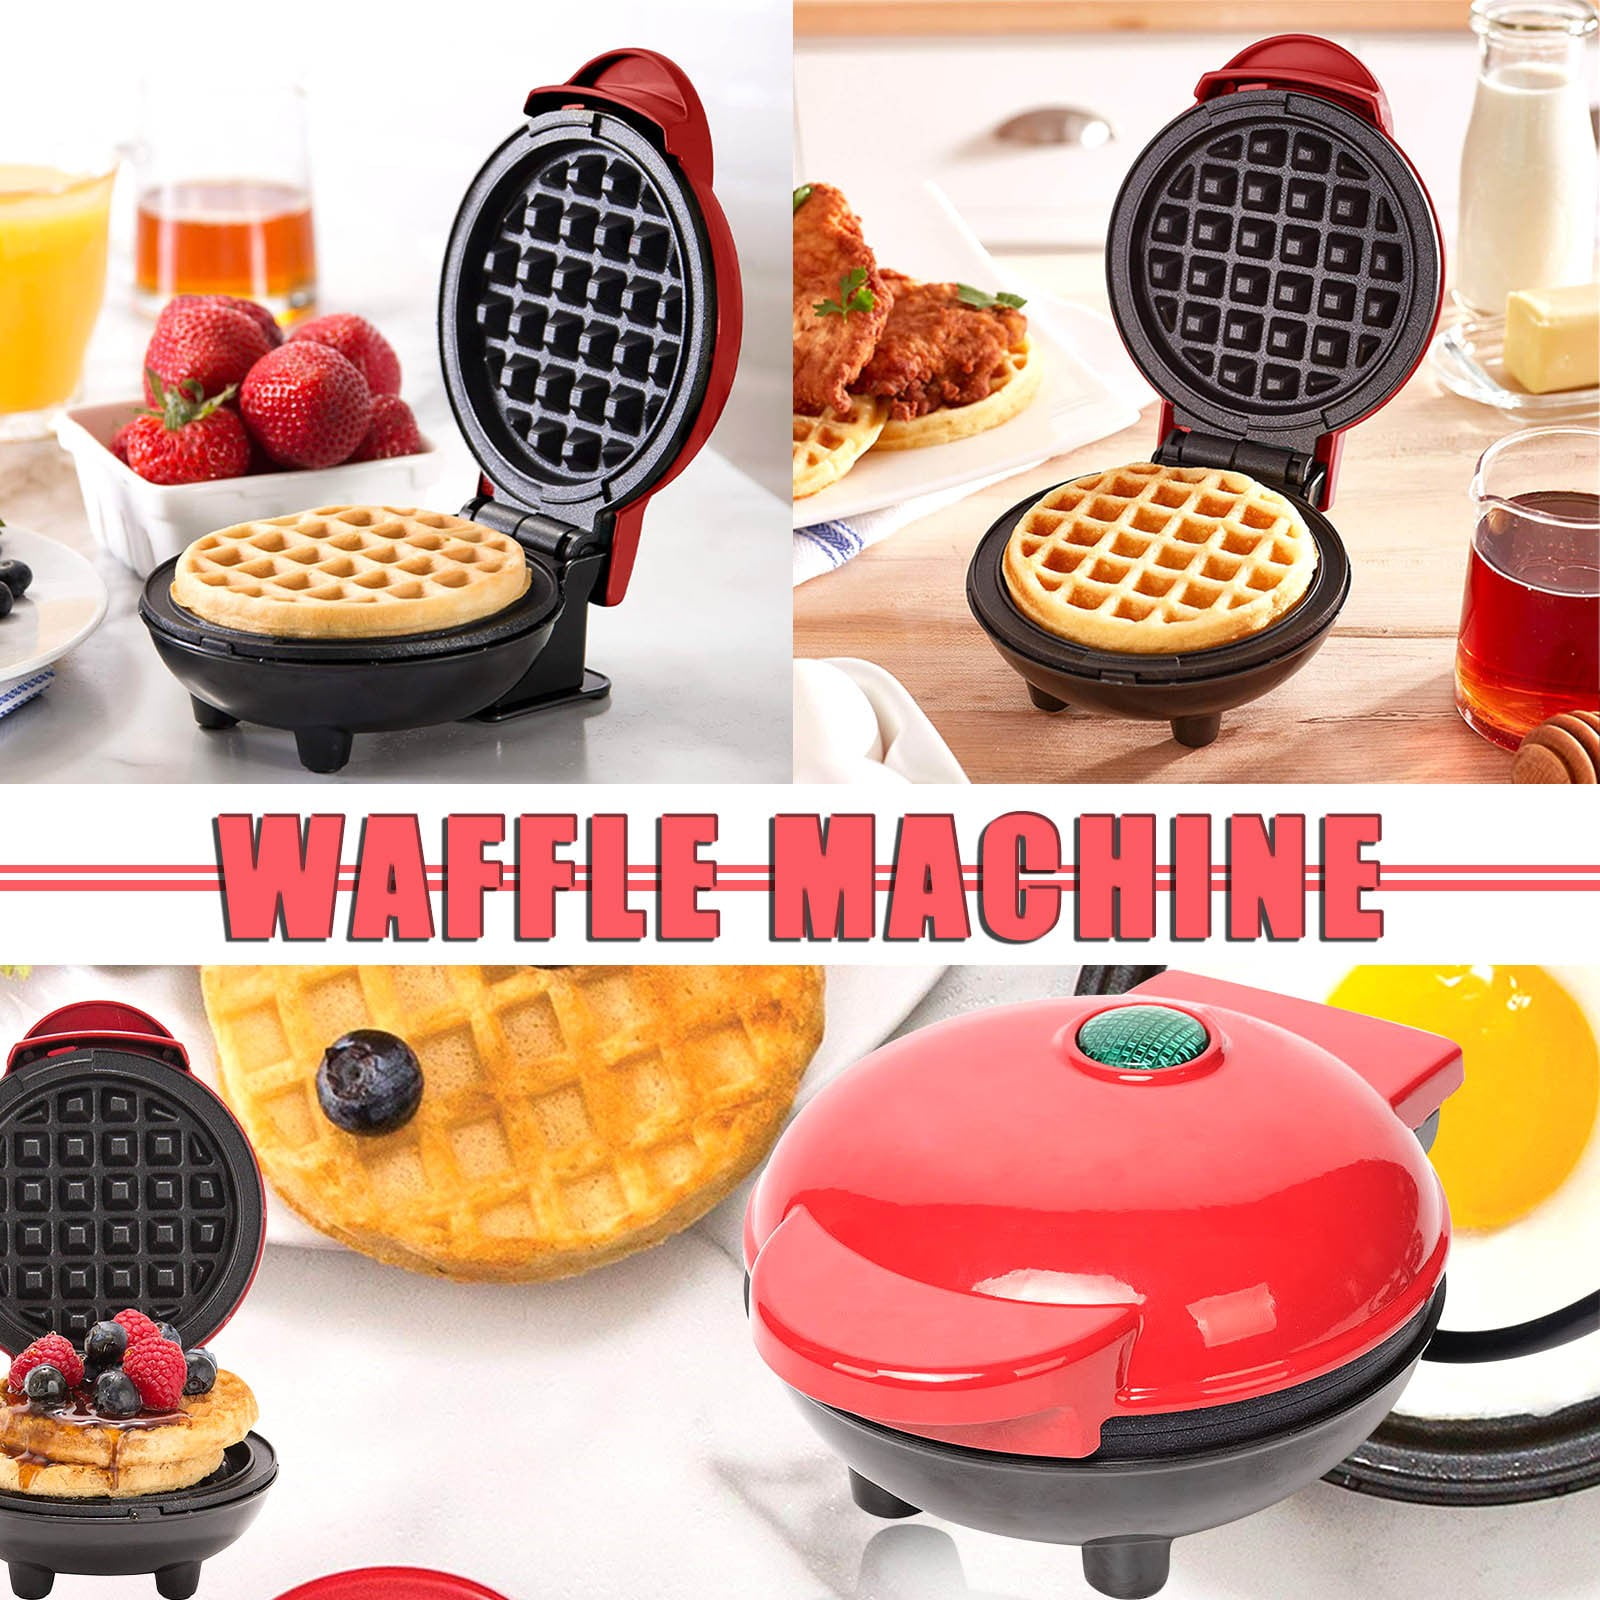 Details about   Electric Commercial Snack Maker Waffle Maker Cartoon Cake Waffle Machine 110V 